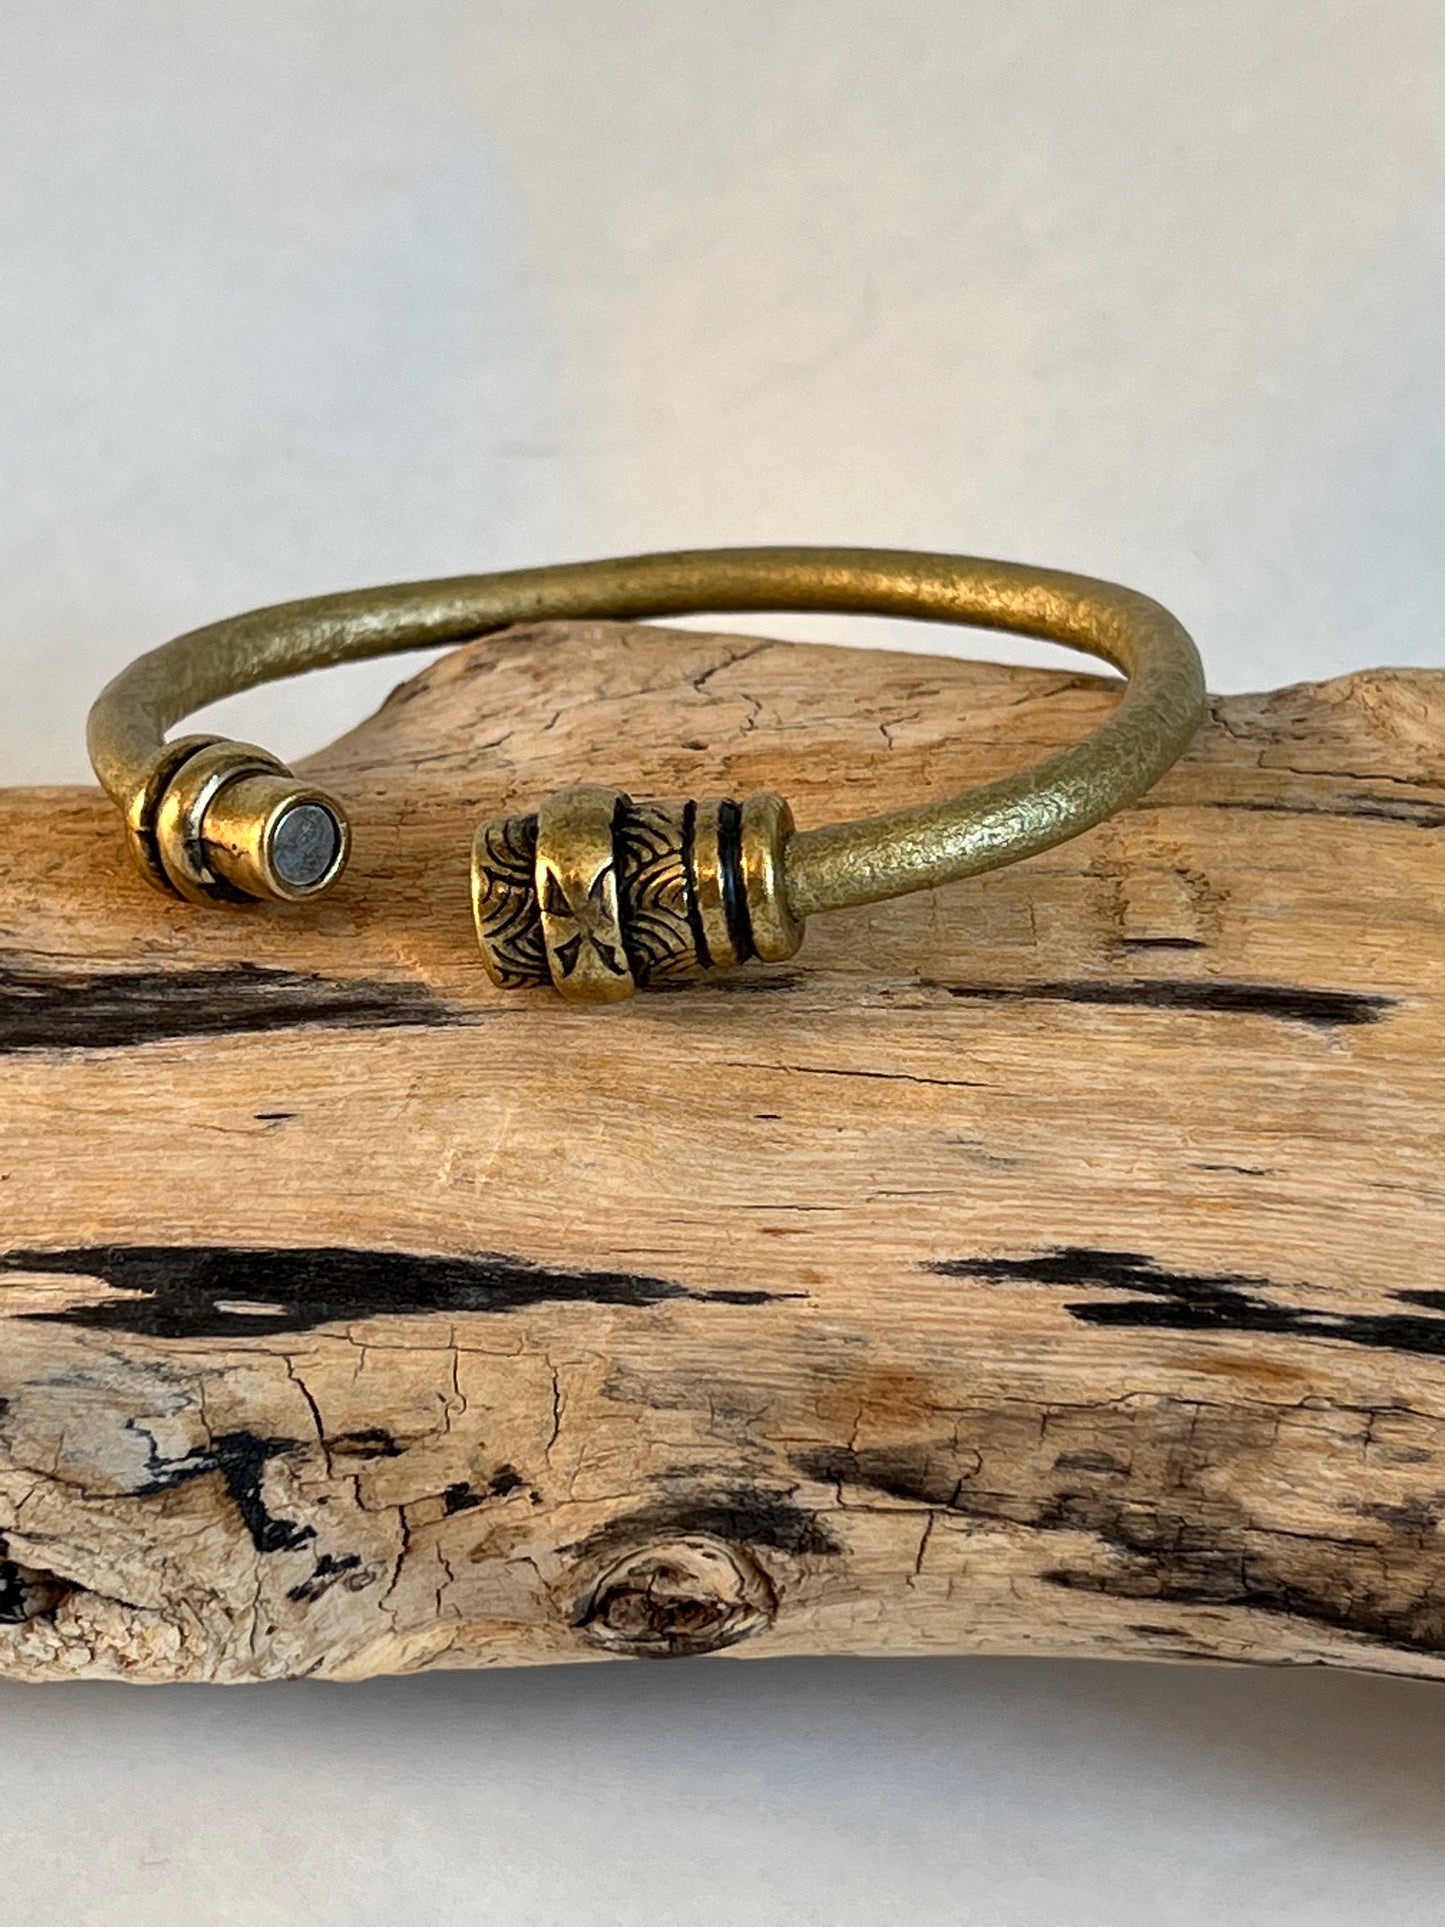 Italian rich gold metallic color leather bracelet with a fine design accent tube .  Silver magnetic clasp. Soft leather and trendy clasp.